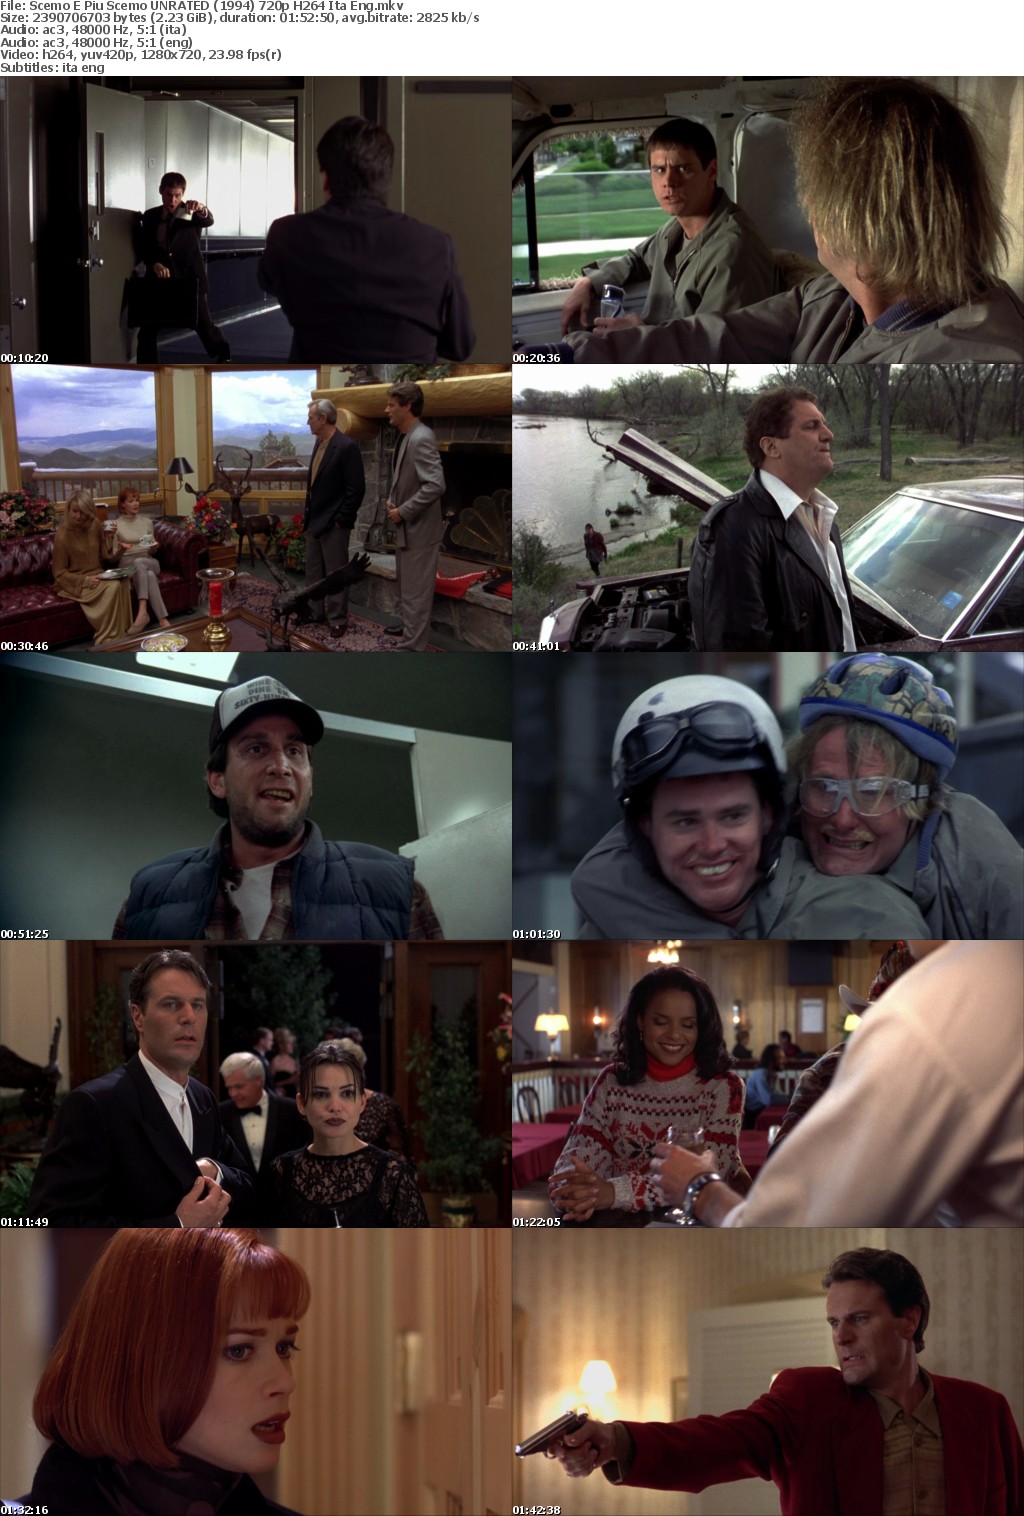 Dumb amp; Dumber UNRATED (1994) 720p H264 Ita Eng Ac3 5 1 Sub NUEng